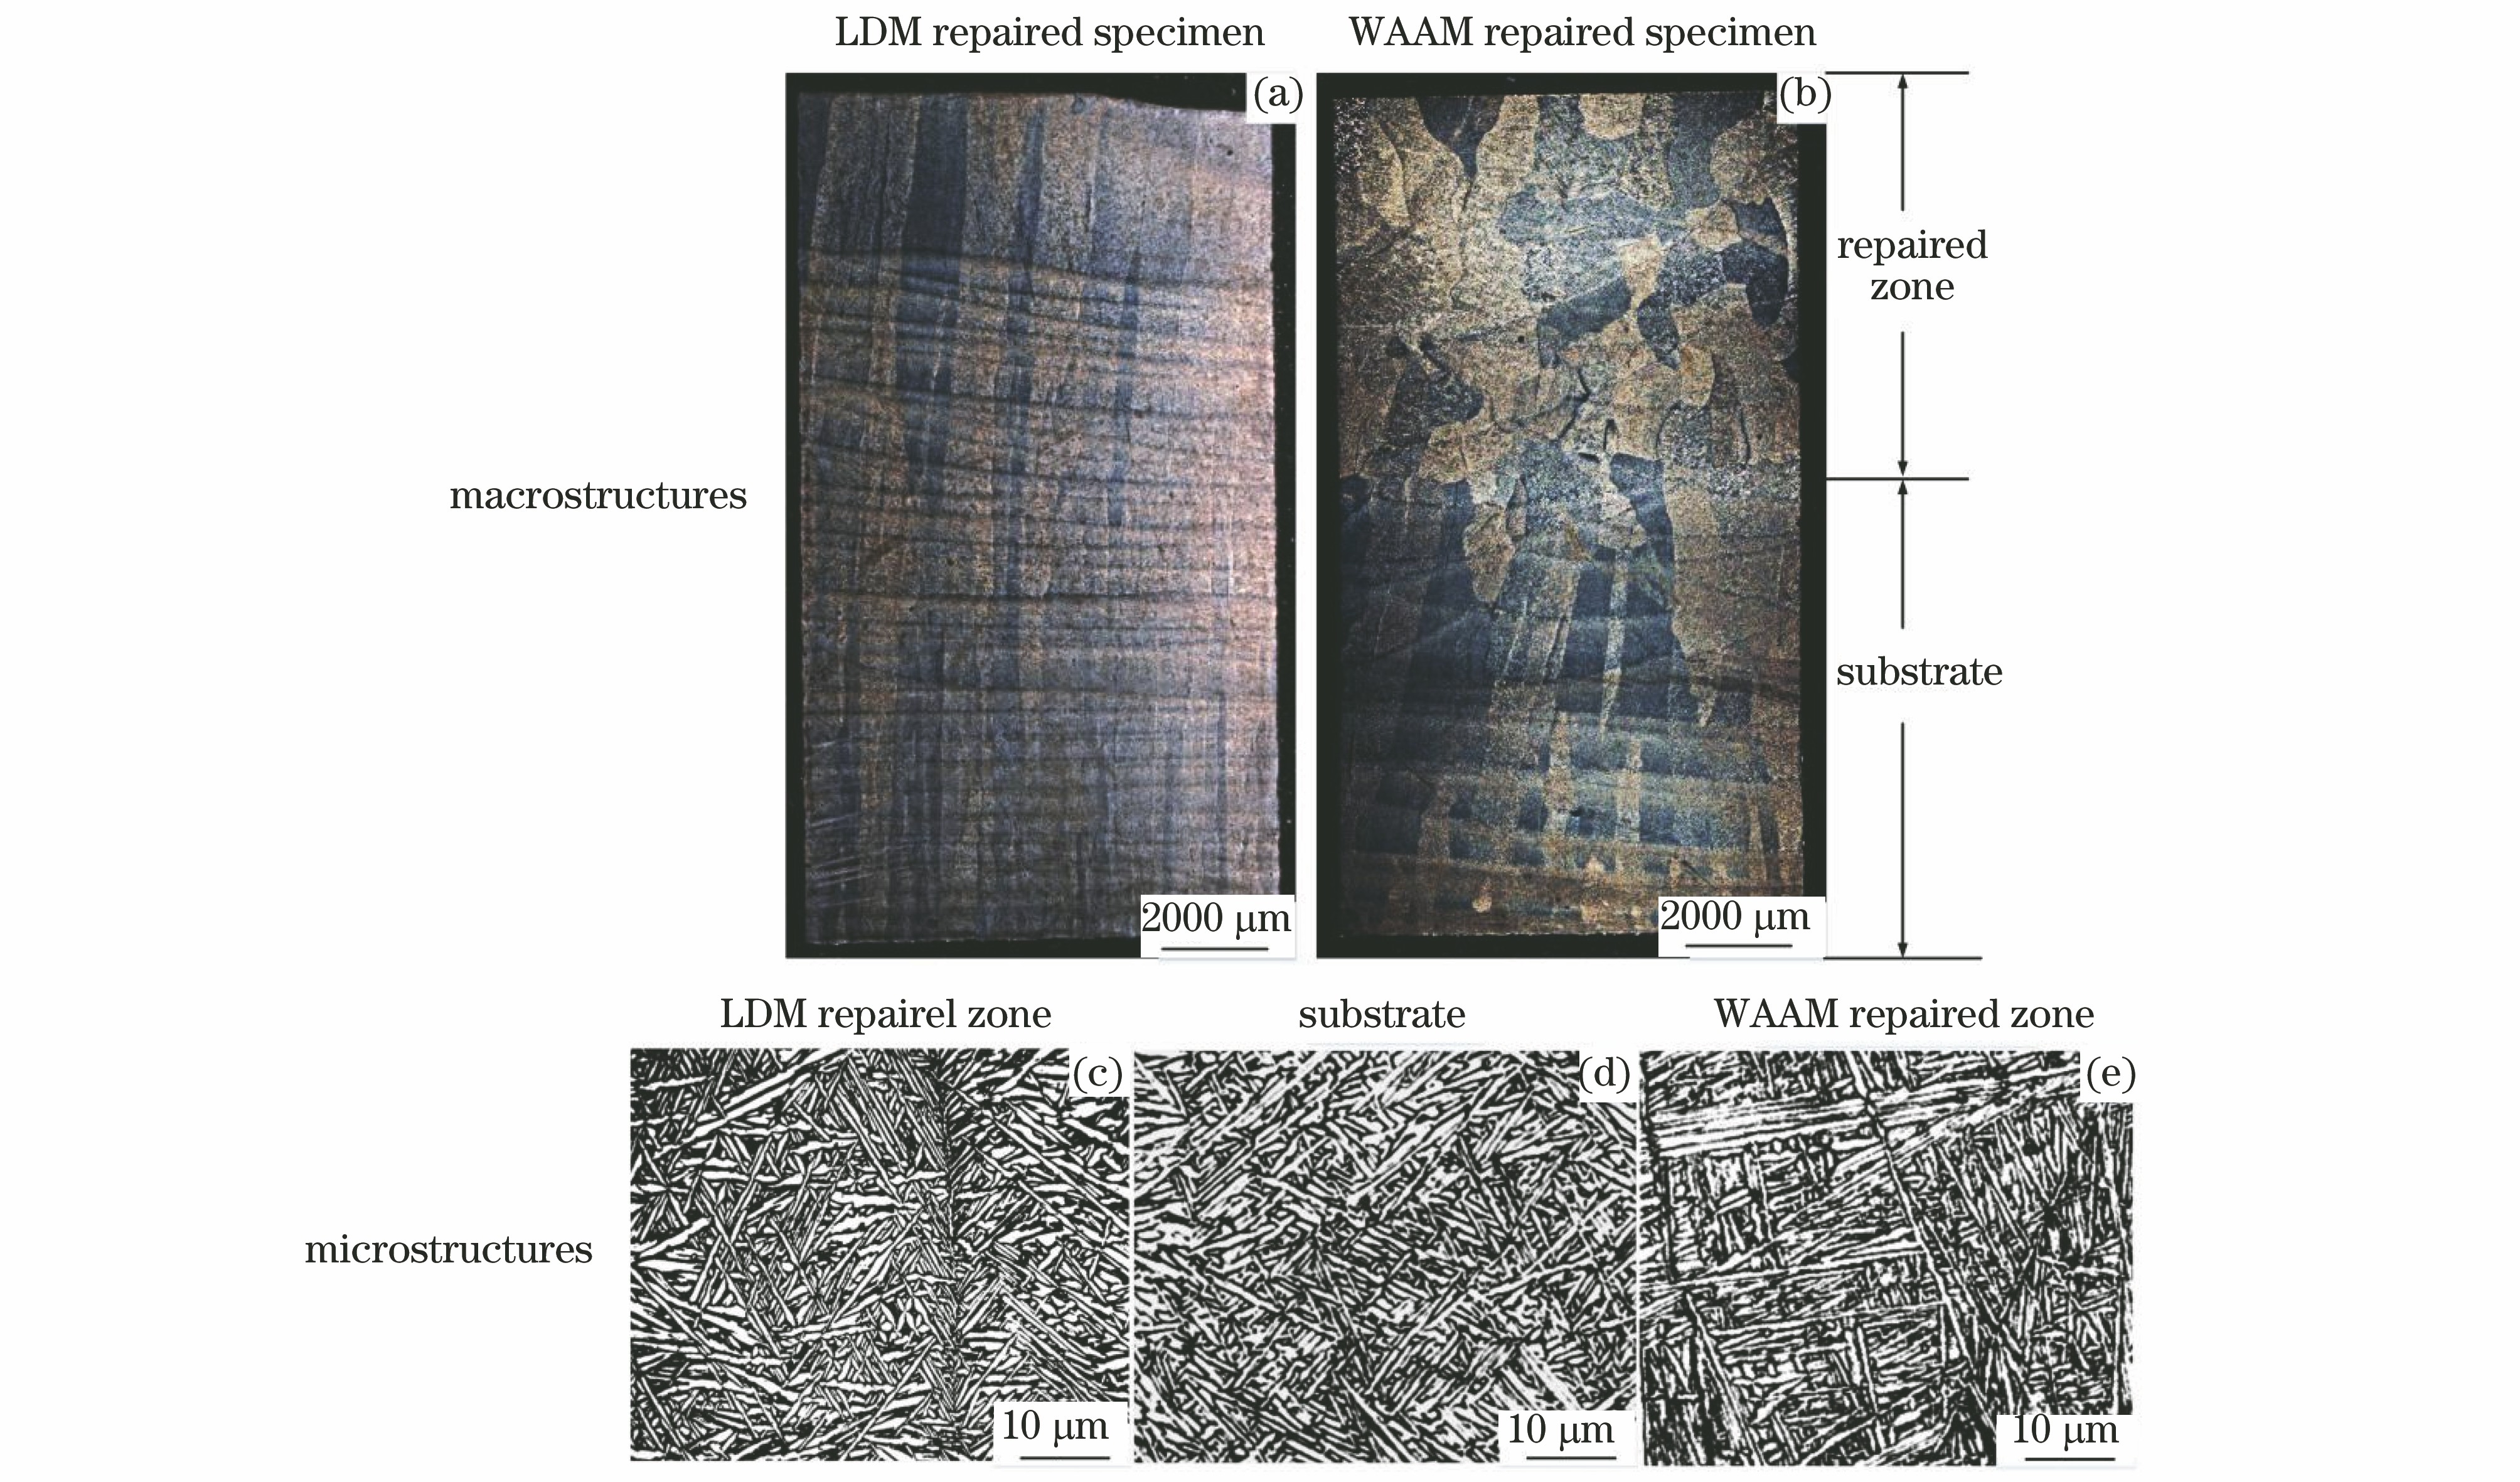 Macrostructures and microstructures of the LDM repaired specimens and WAAM repaired specimens